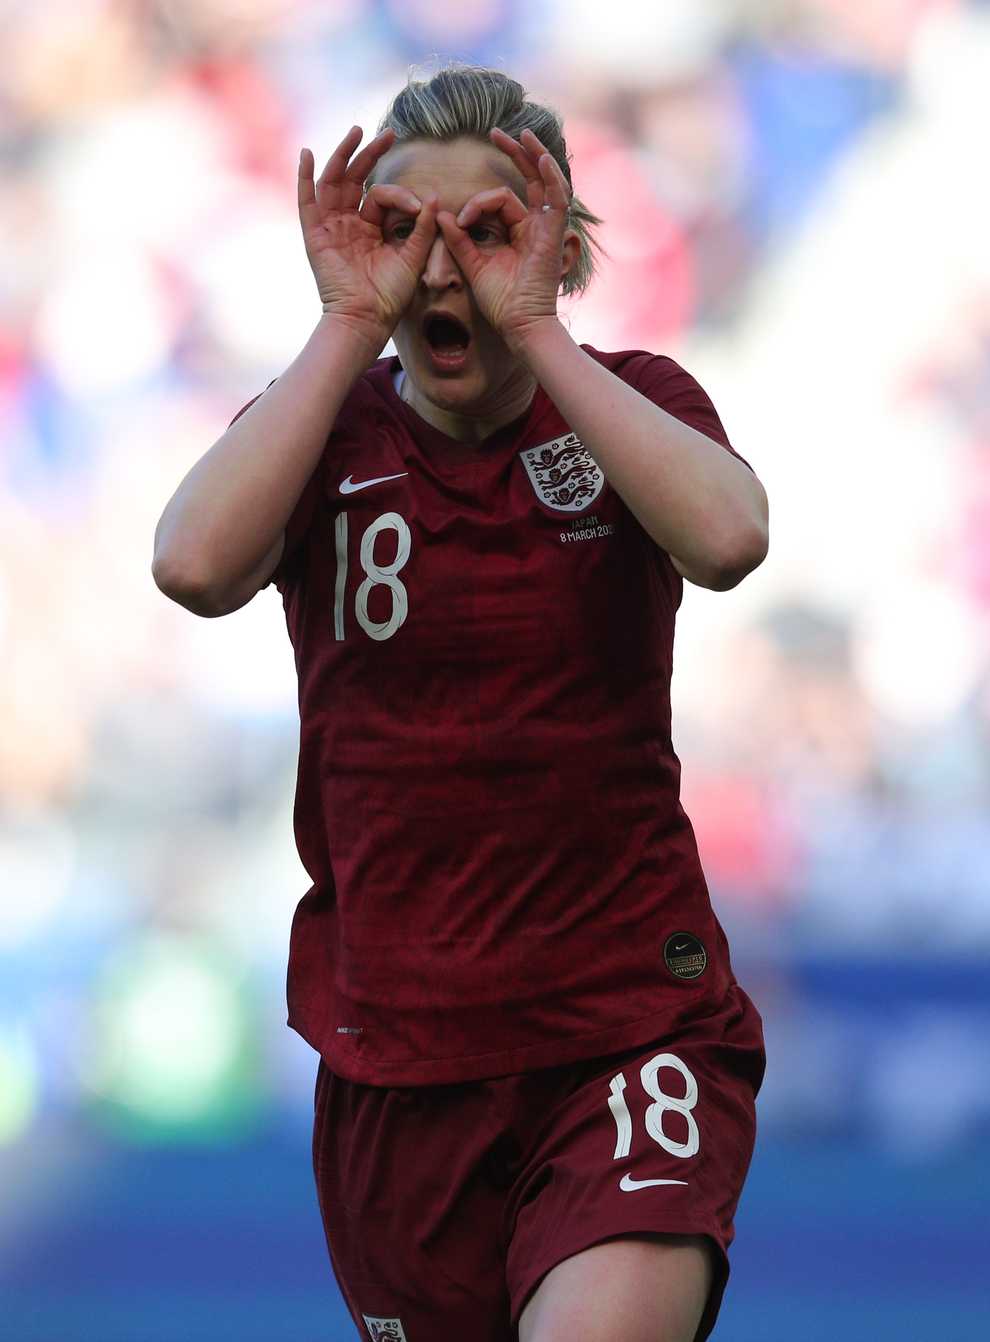 White celebrated with her trademark celebration after snatching victory for the Lionesses (PA Images)